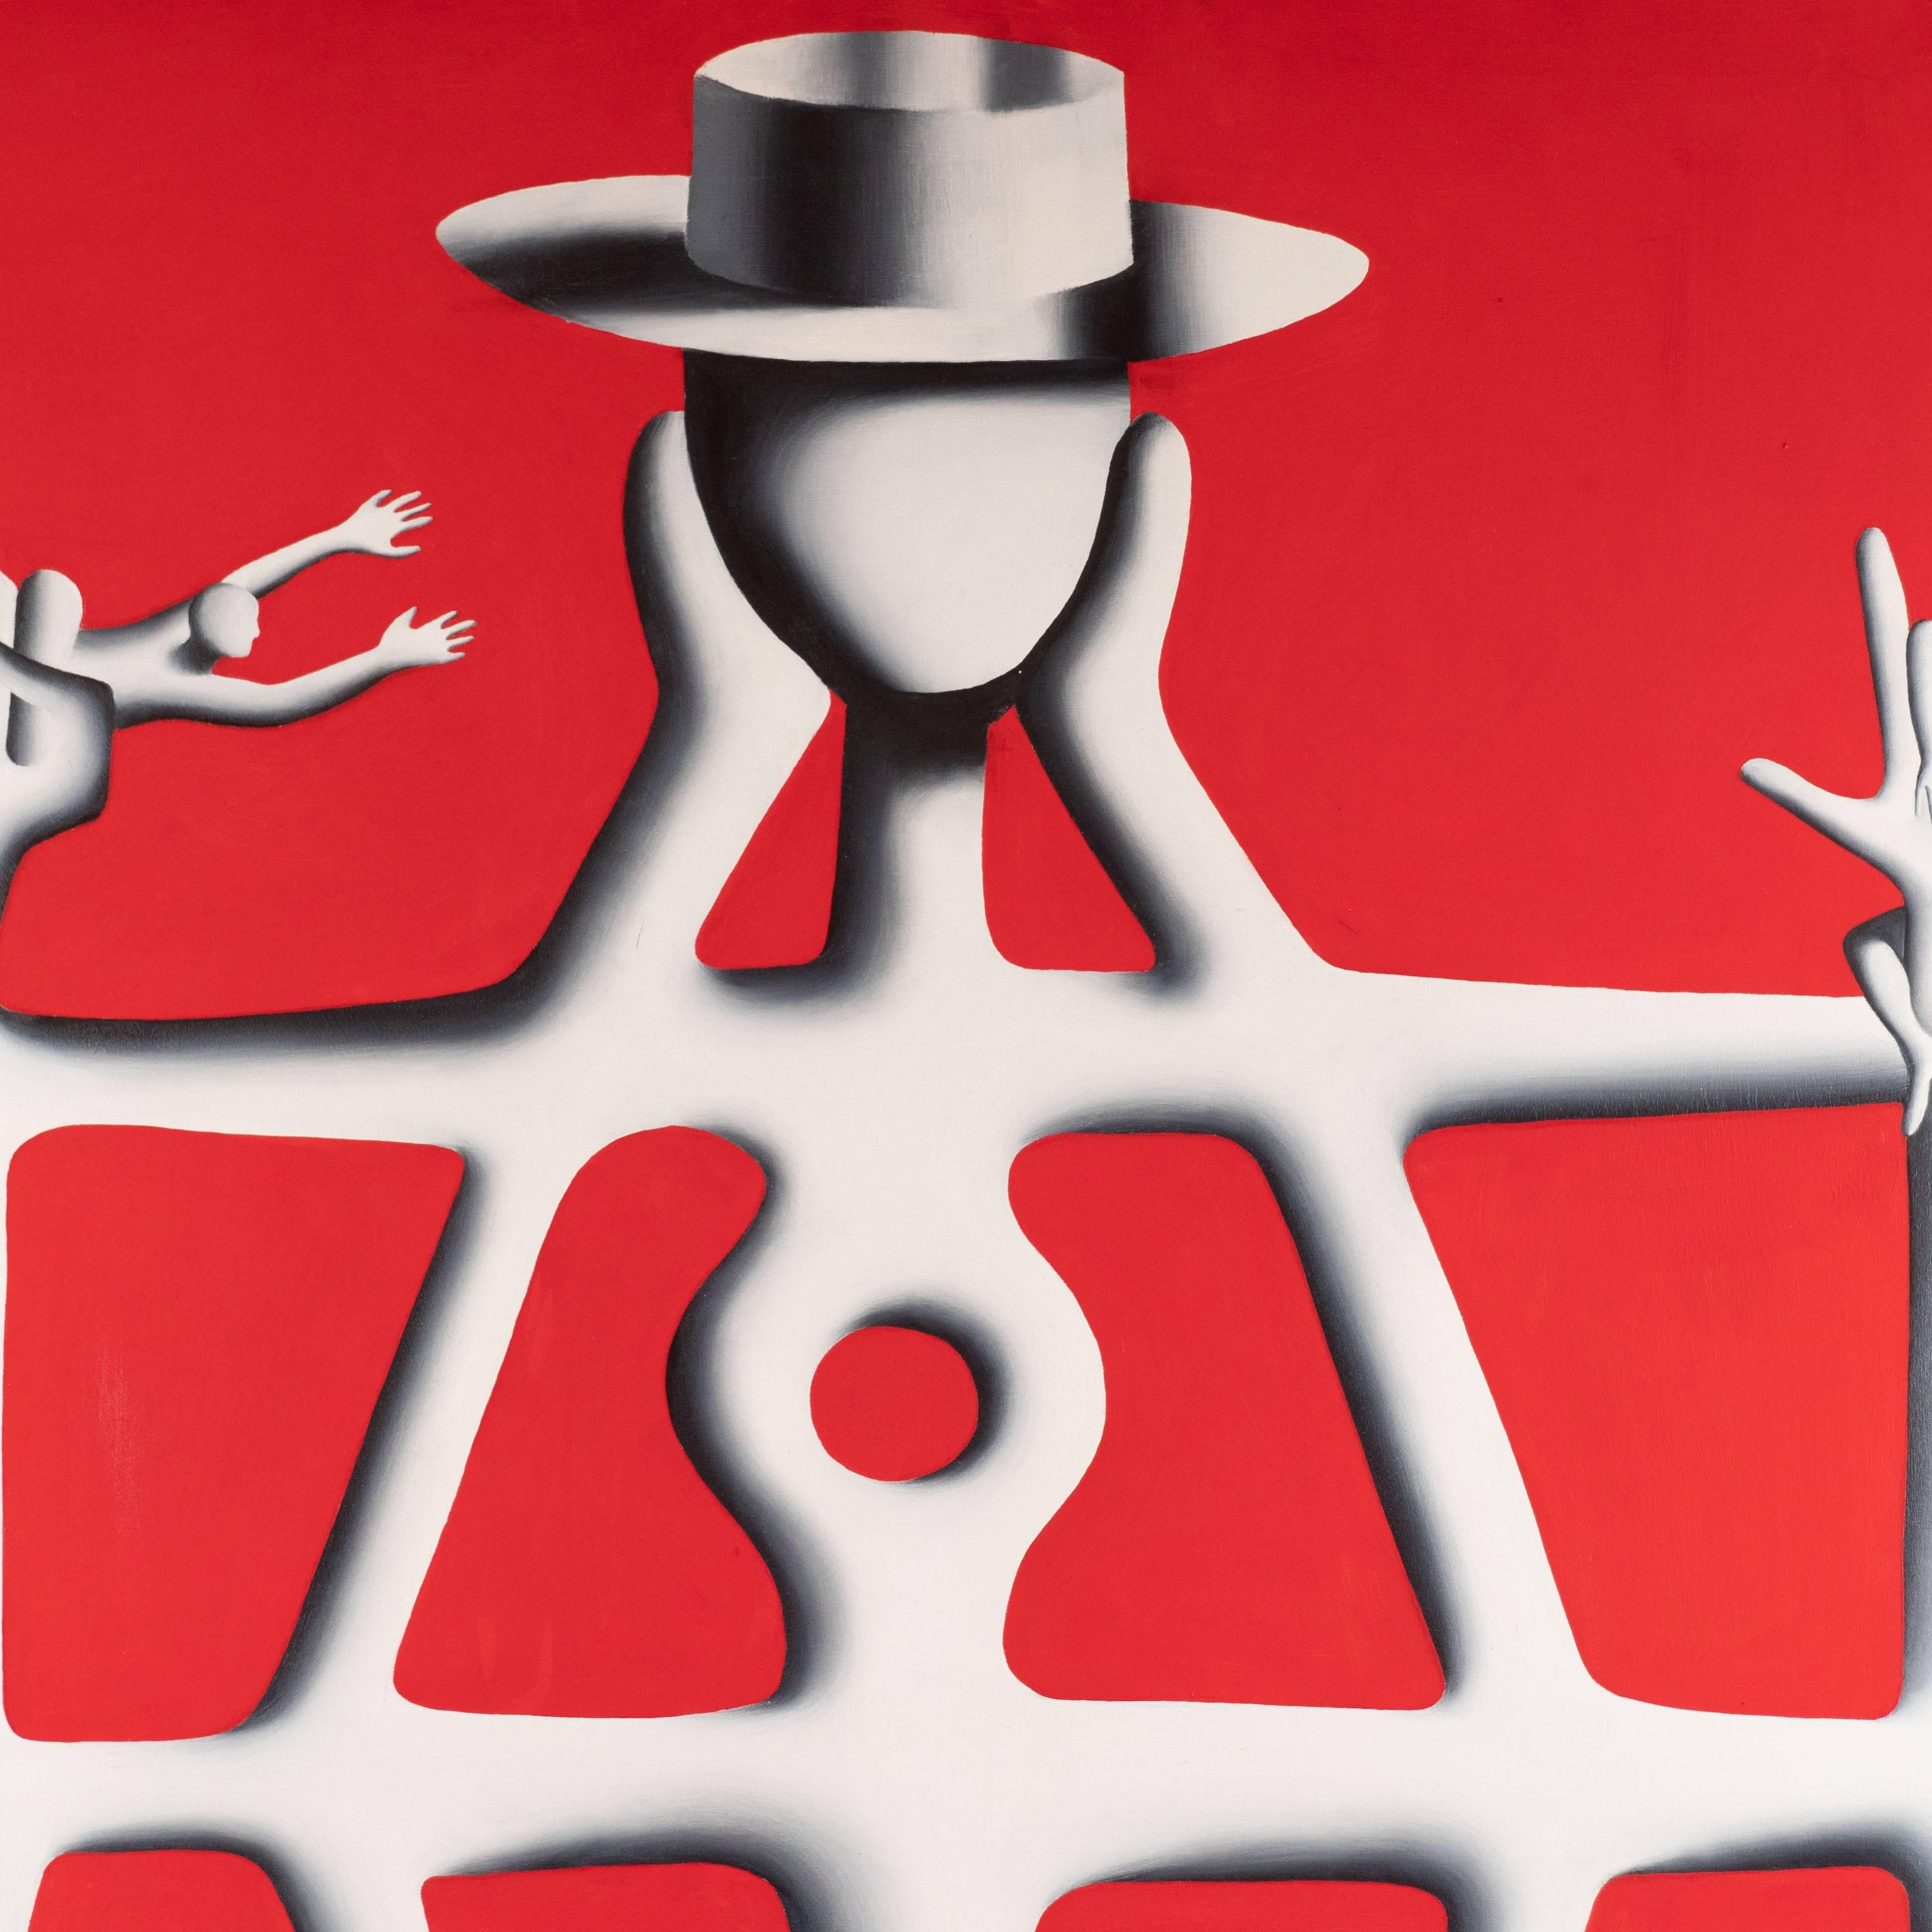 Structural Engineer - Painting by Mark Kostabi